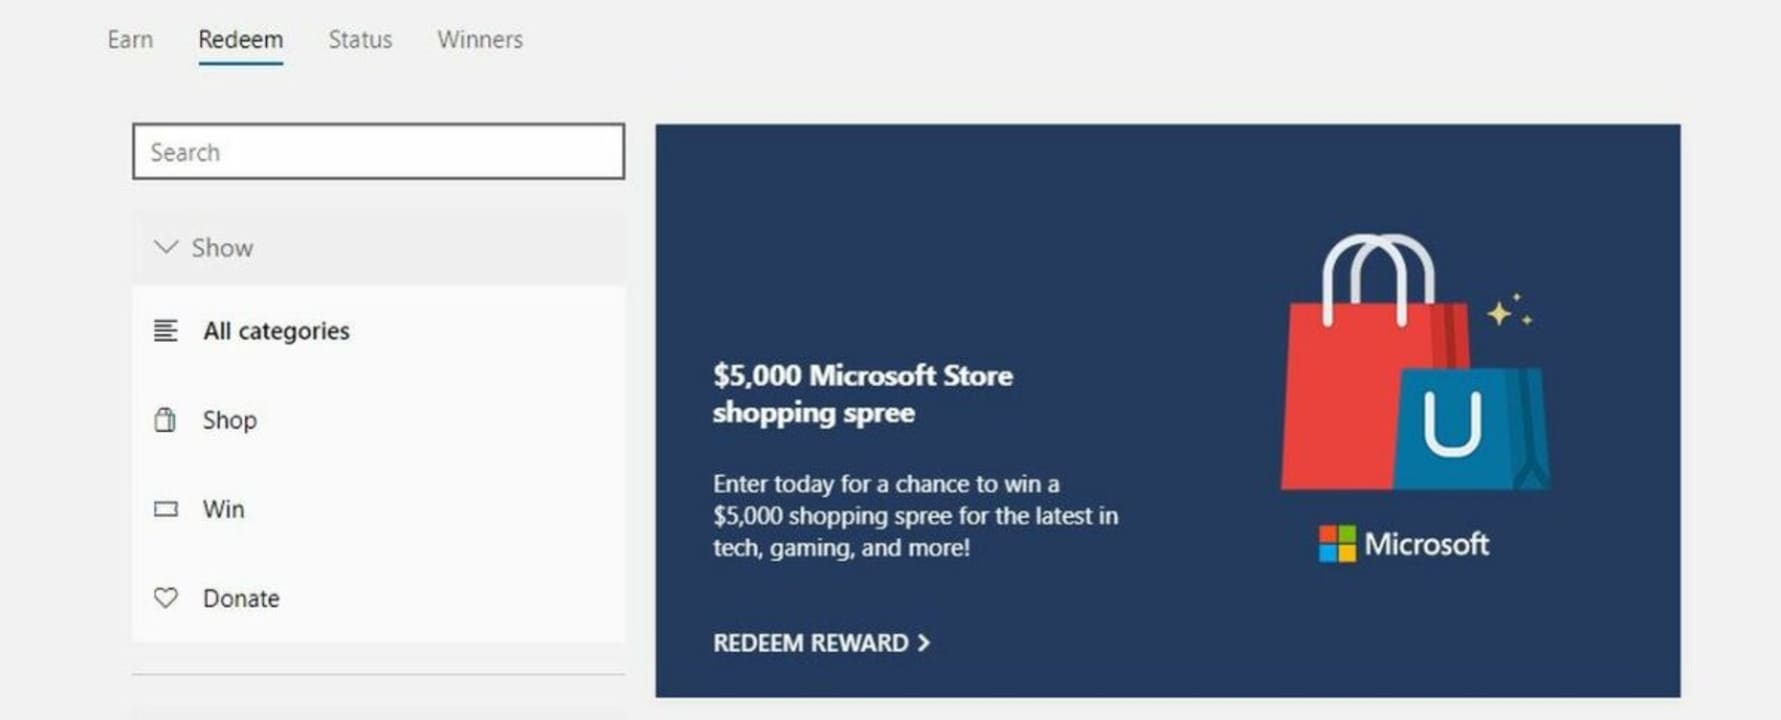 Redeem points through the Microsoft Store